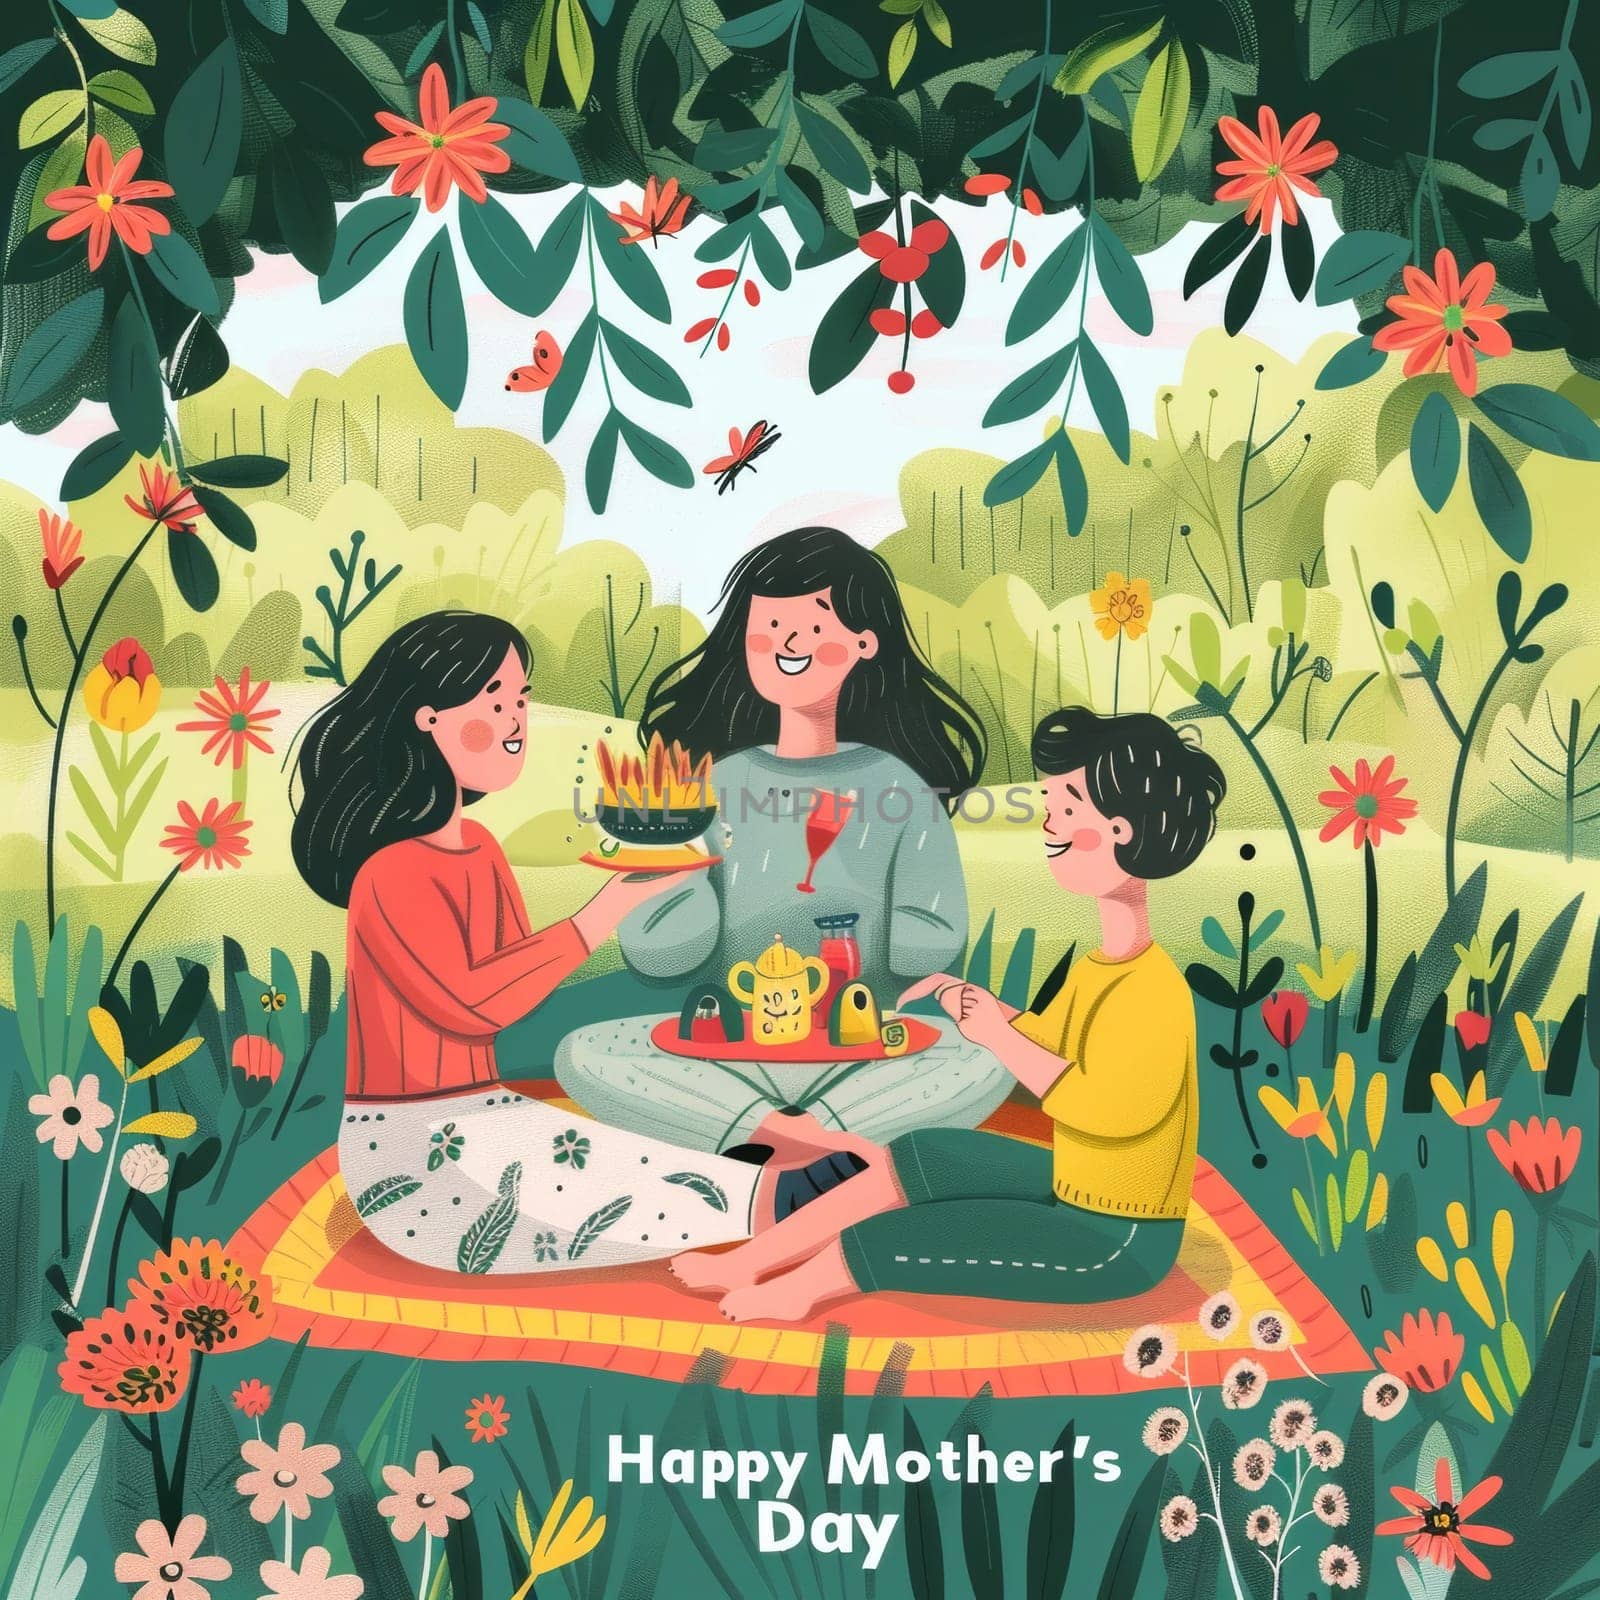 A vibrant illustration depicting a family enjoying a picnic on Mothers Day, surrounded by lush greenery and blooming flowers